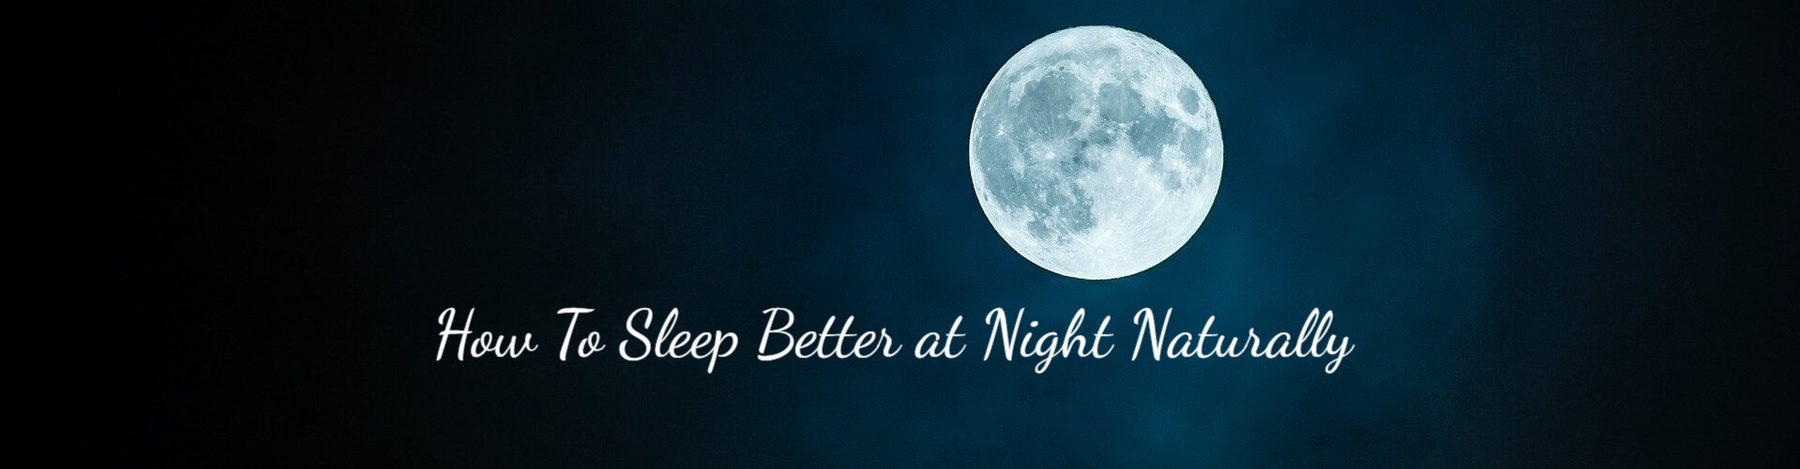 How To Sleep Better at Night Naturally